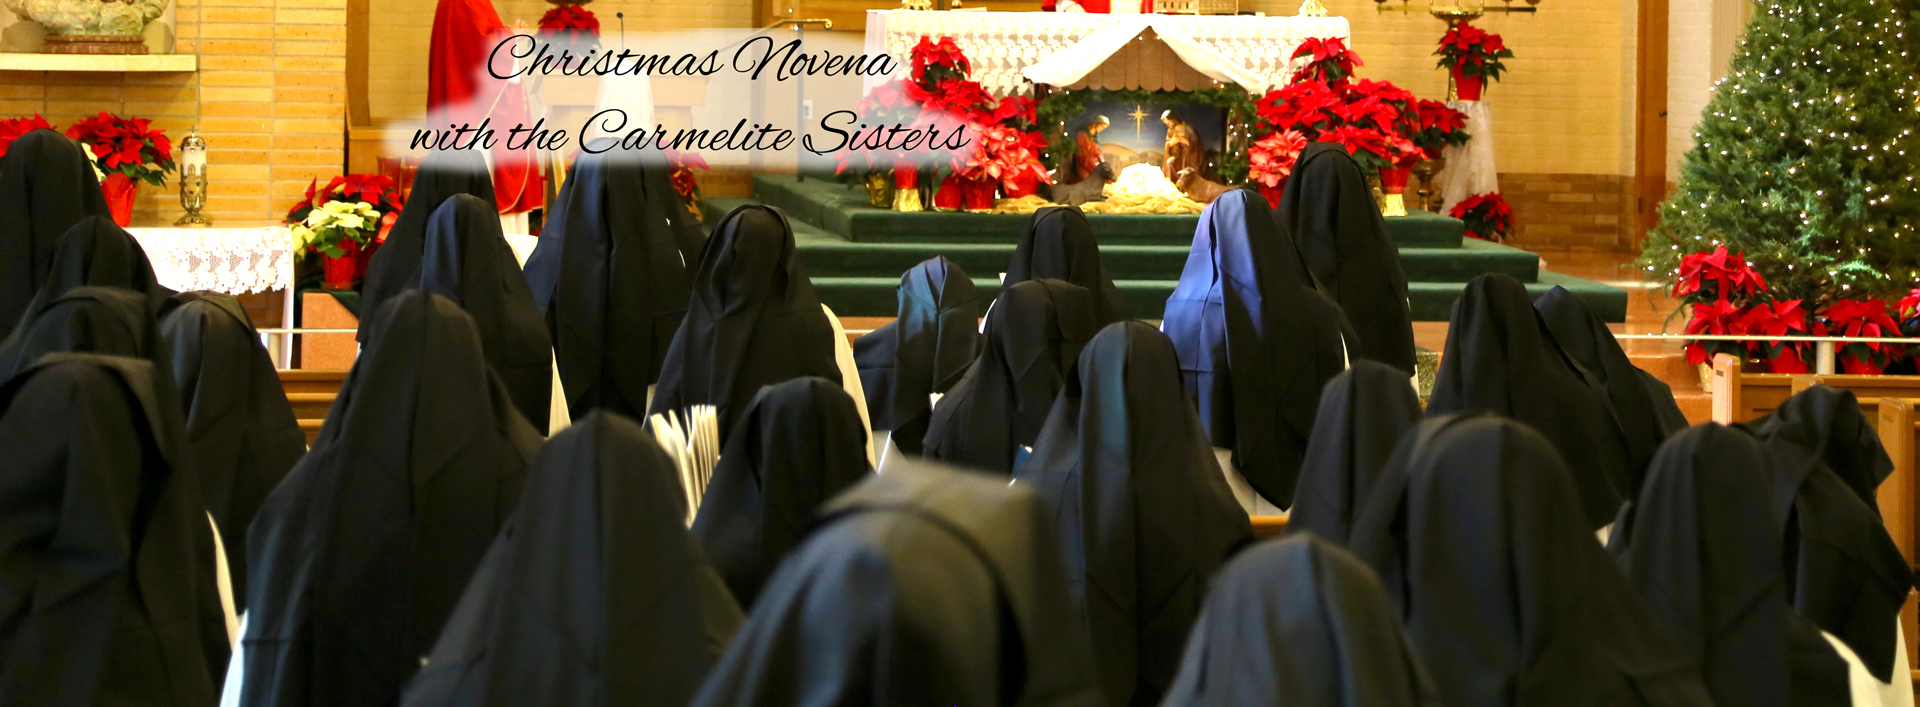 Community of Sisters praying in Chapel, 'Christmas Novena with the Carmelite Sisters'